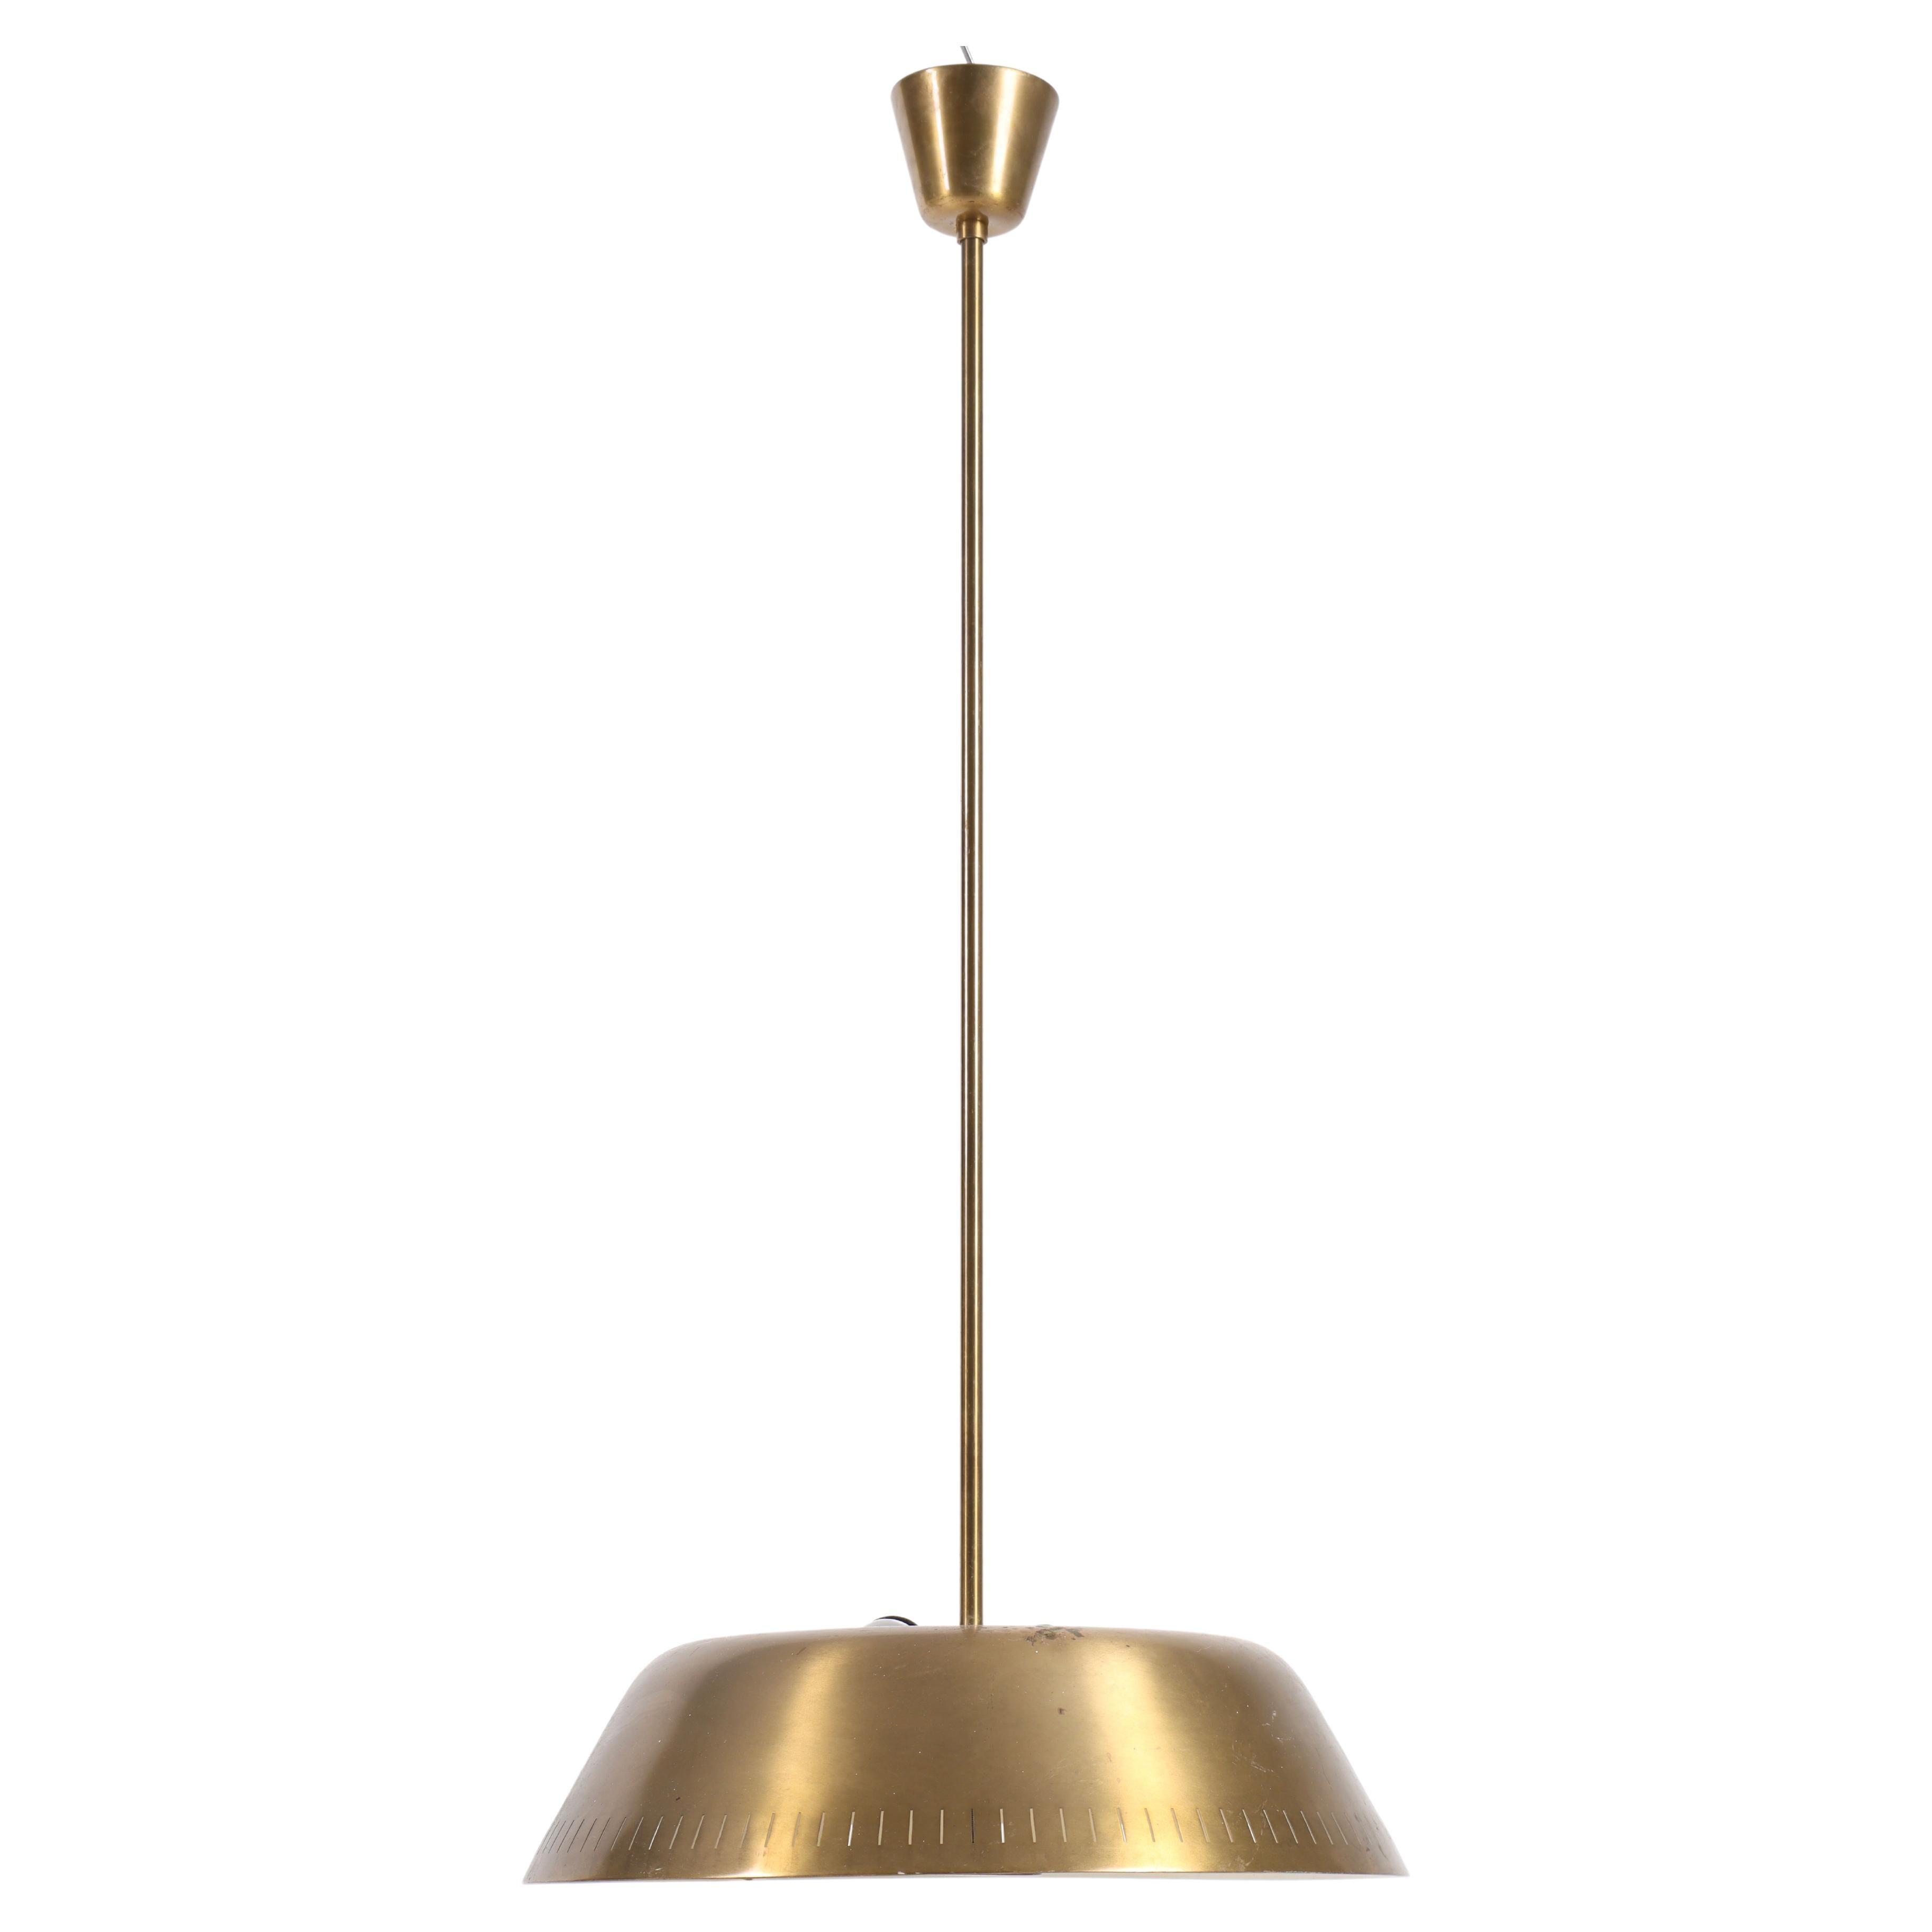 Midcentury Ceiling Lamp in Brass by Harald Notini, 1950s For Sale